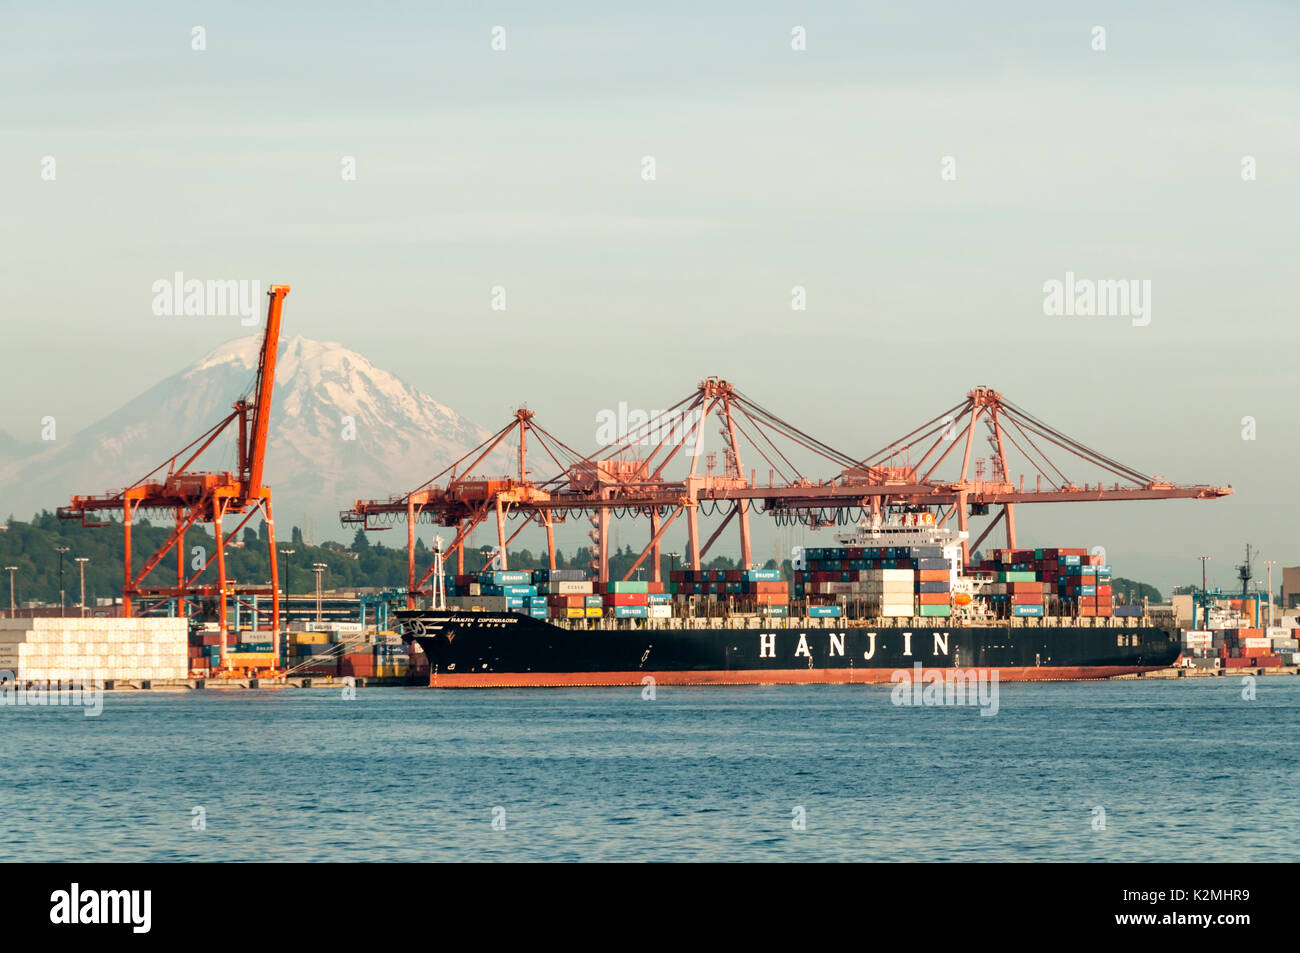 The container ship Hanjin Copenhagen in Seattle container port with Mount Rainier in the background. Stock Photo